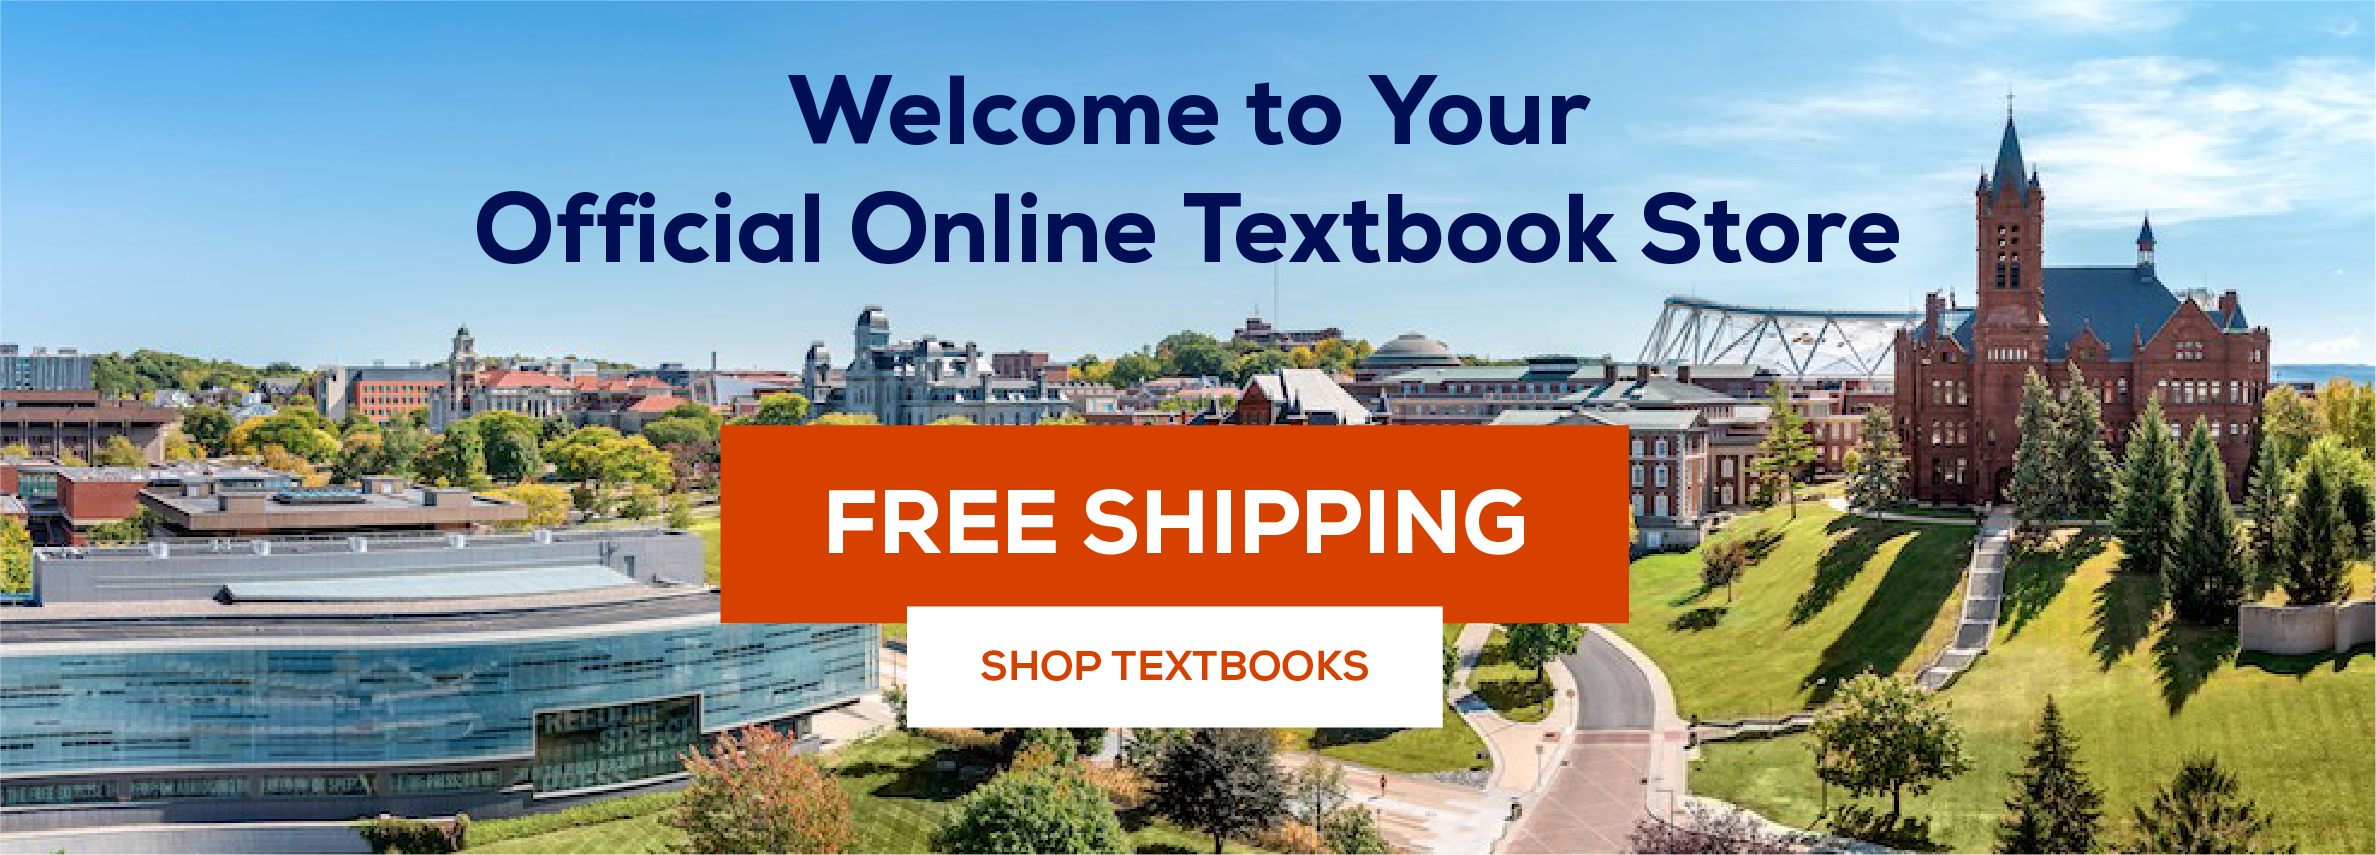 Welcome to your official online bookstore! Free Shipping! Shop Textbooks